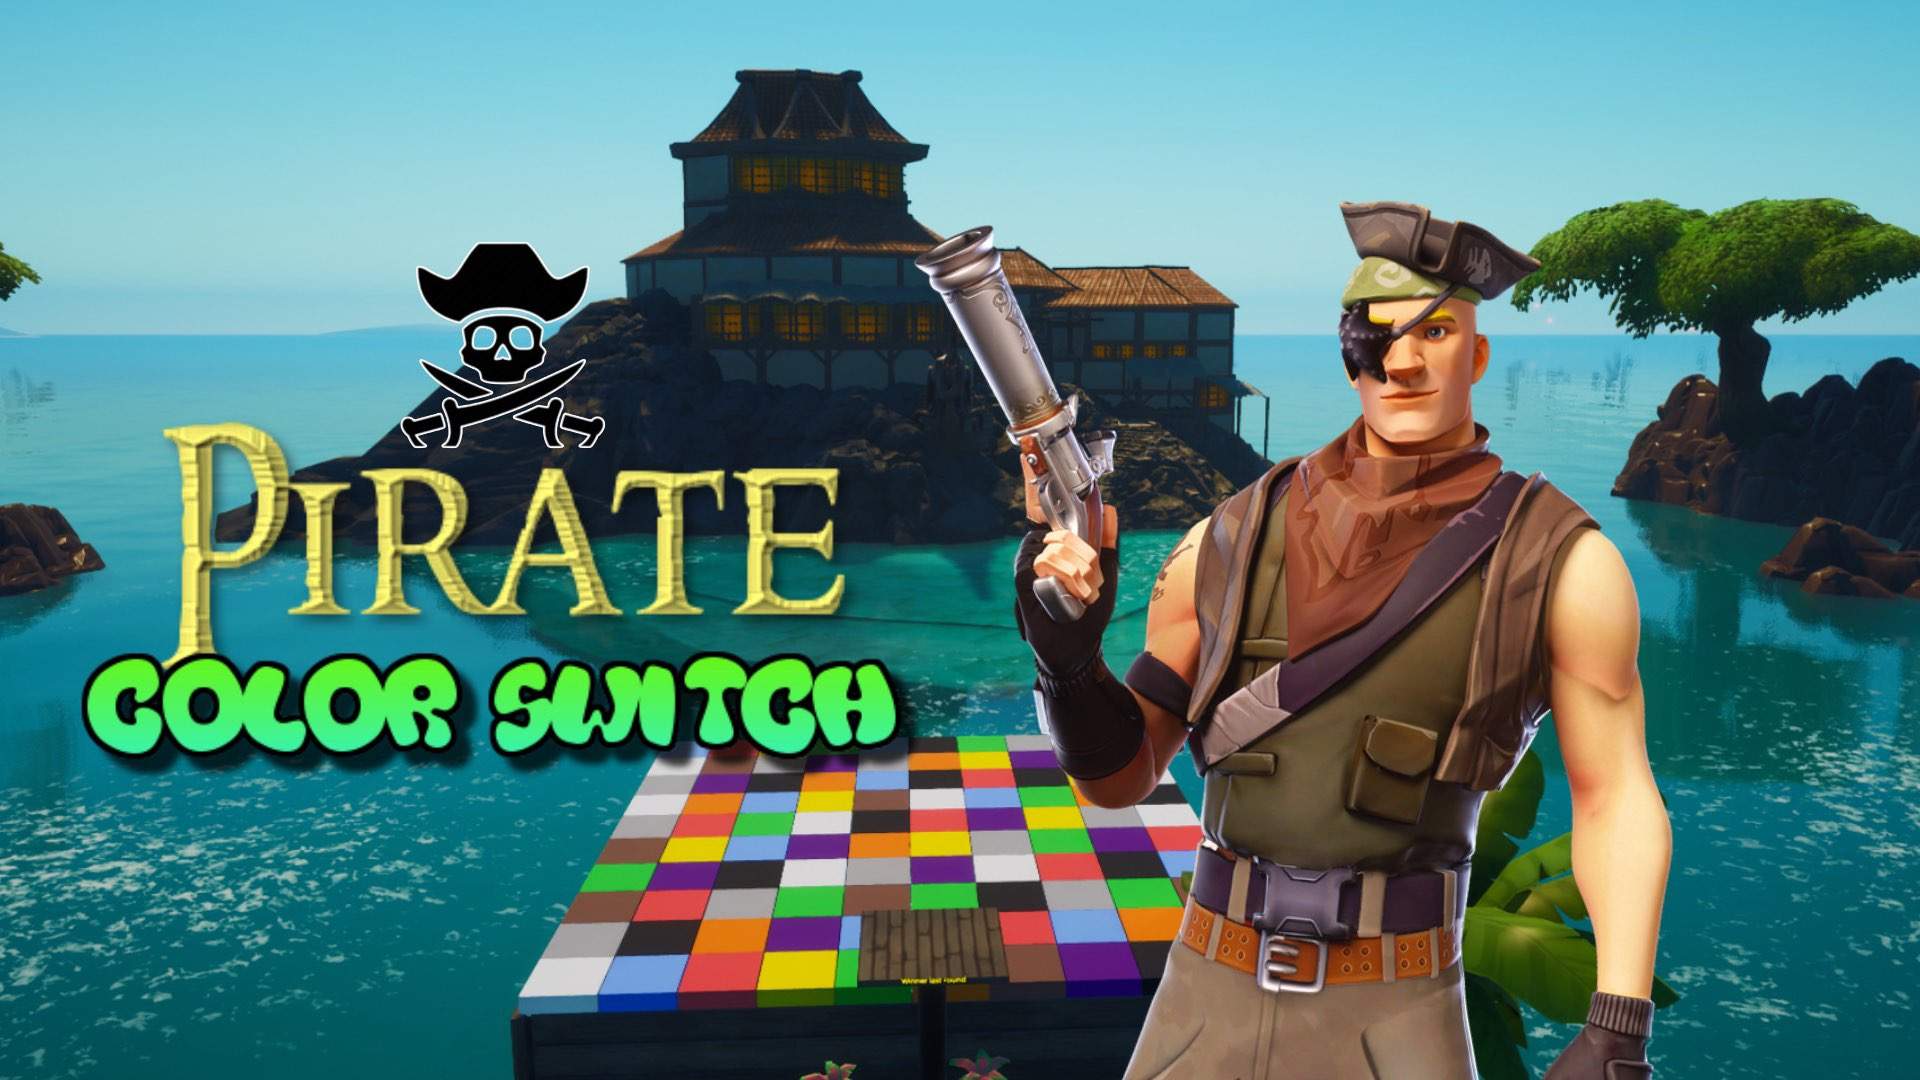 🏝 Pirate Color Switch 🎨